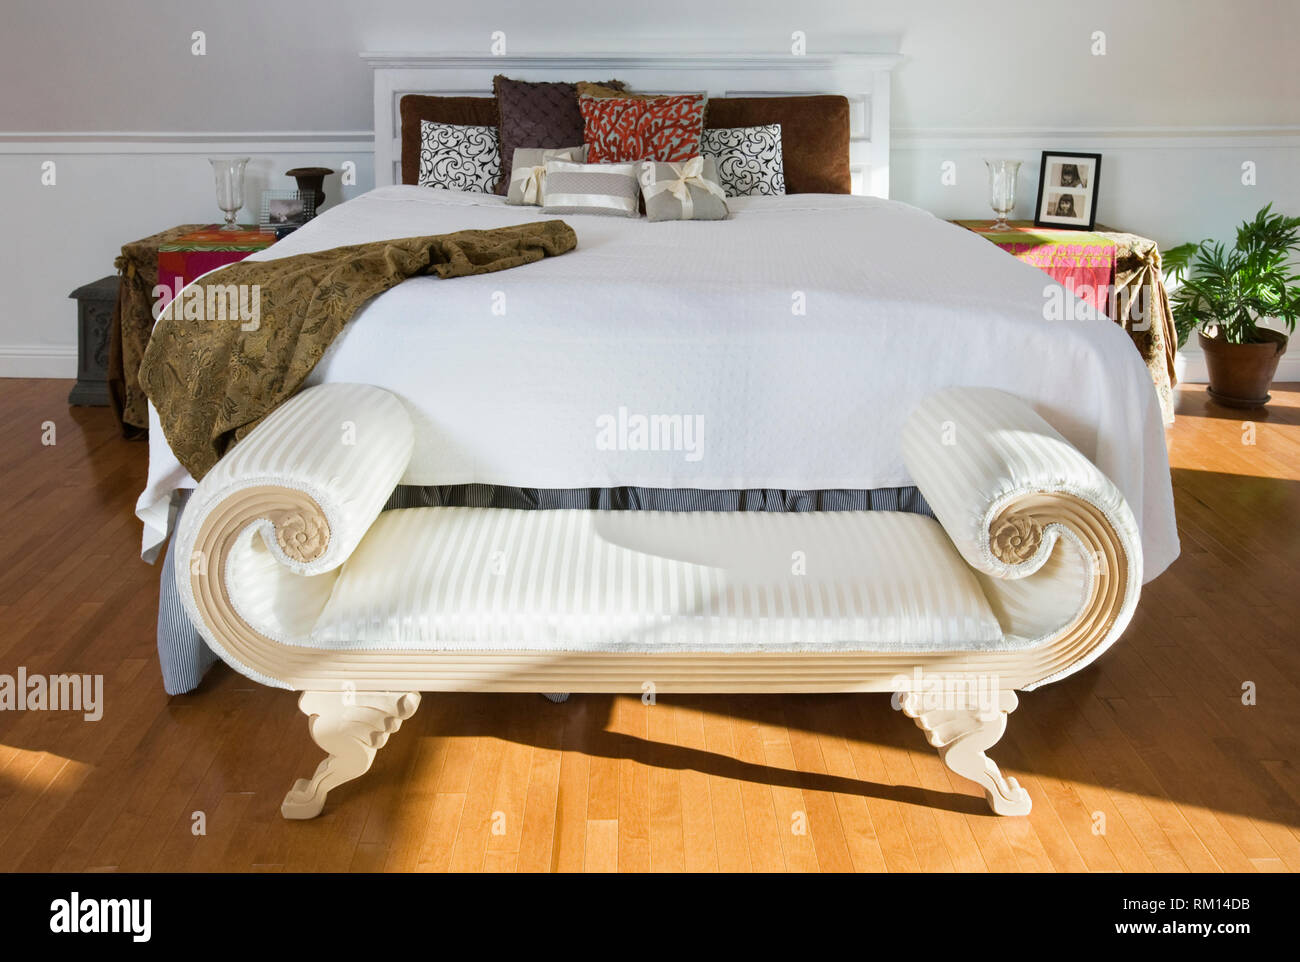 Bench At Foot Of Bed Stock Photo Alamy